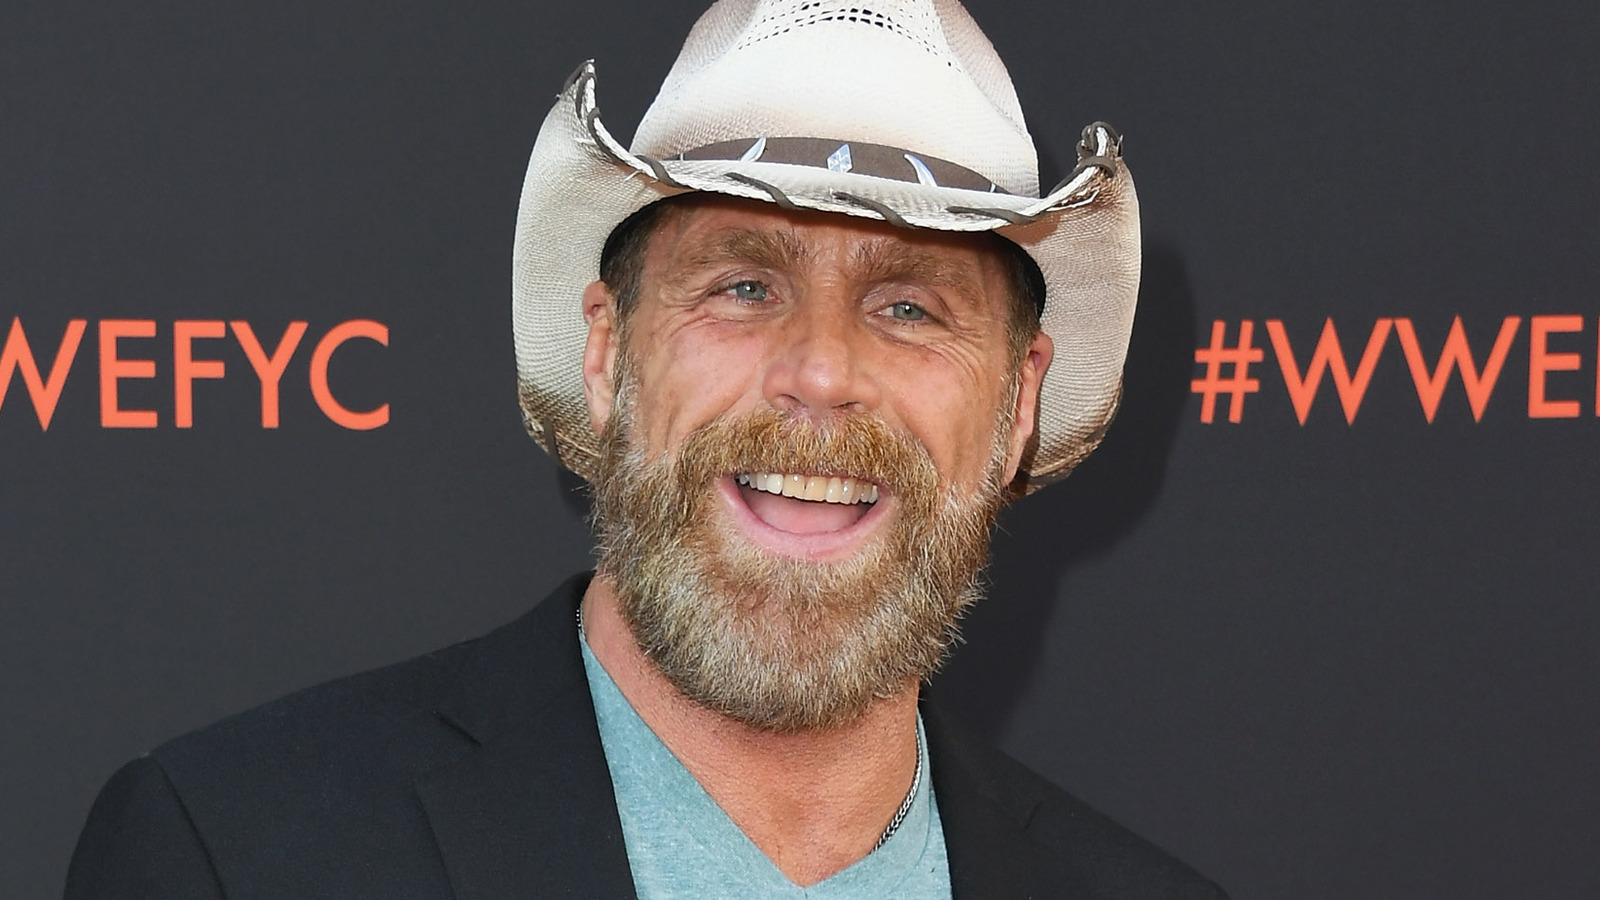 Shawn Michaels Describes WWE Star As 'Special'